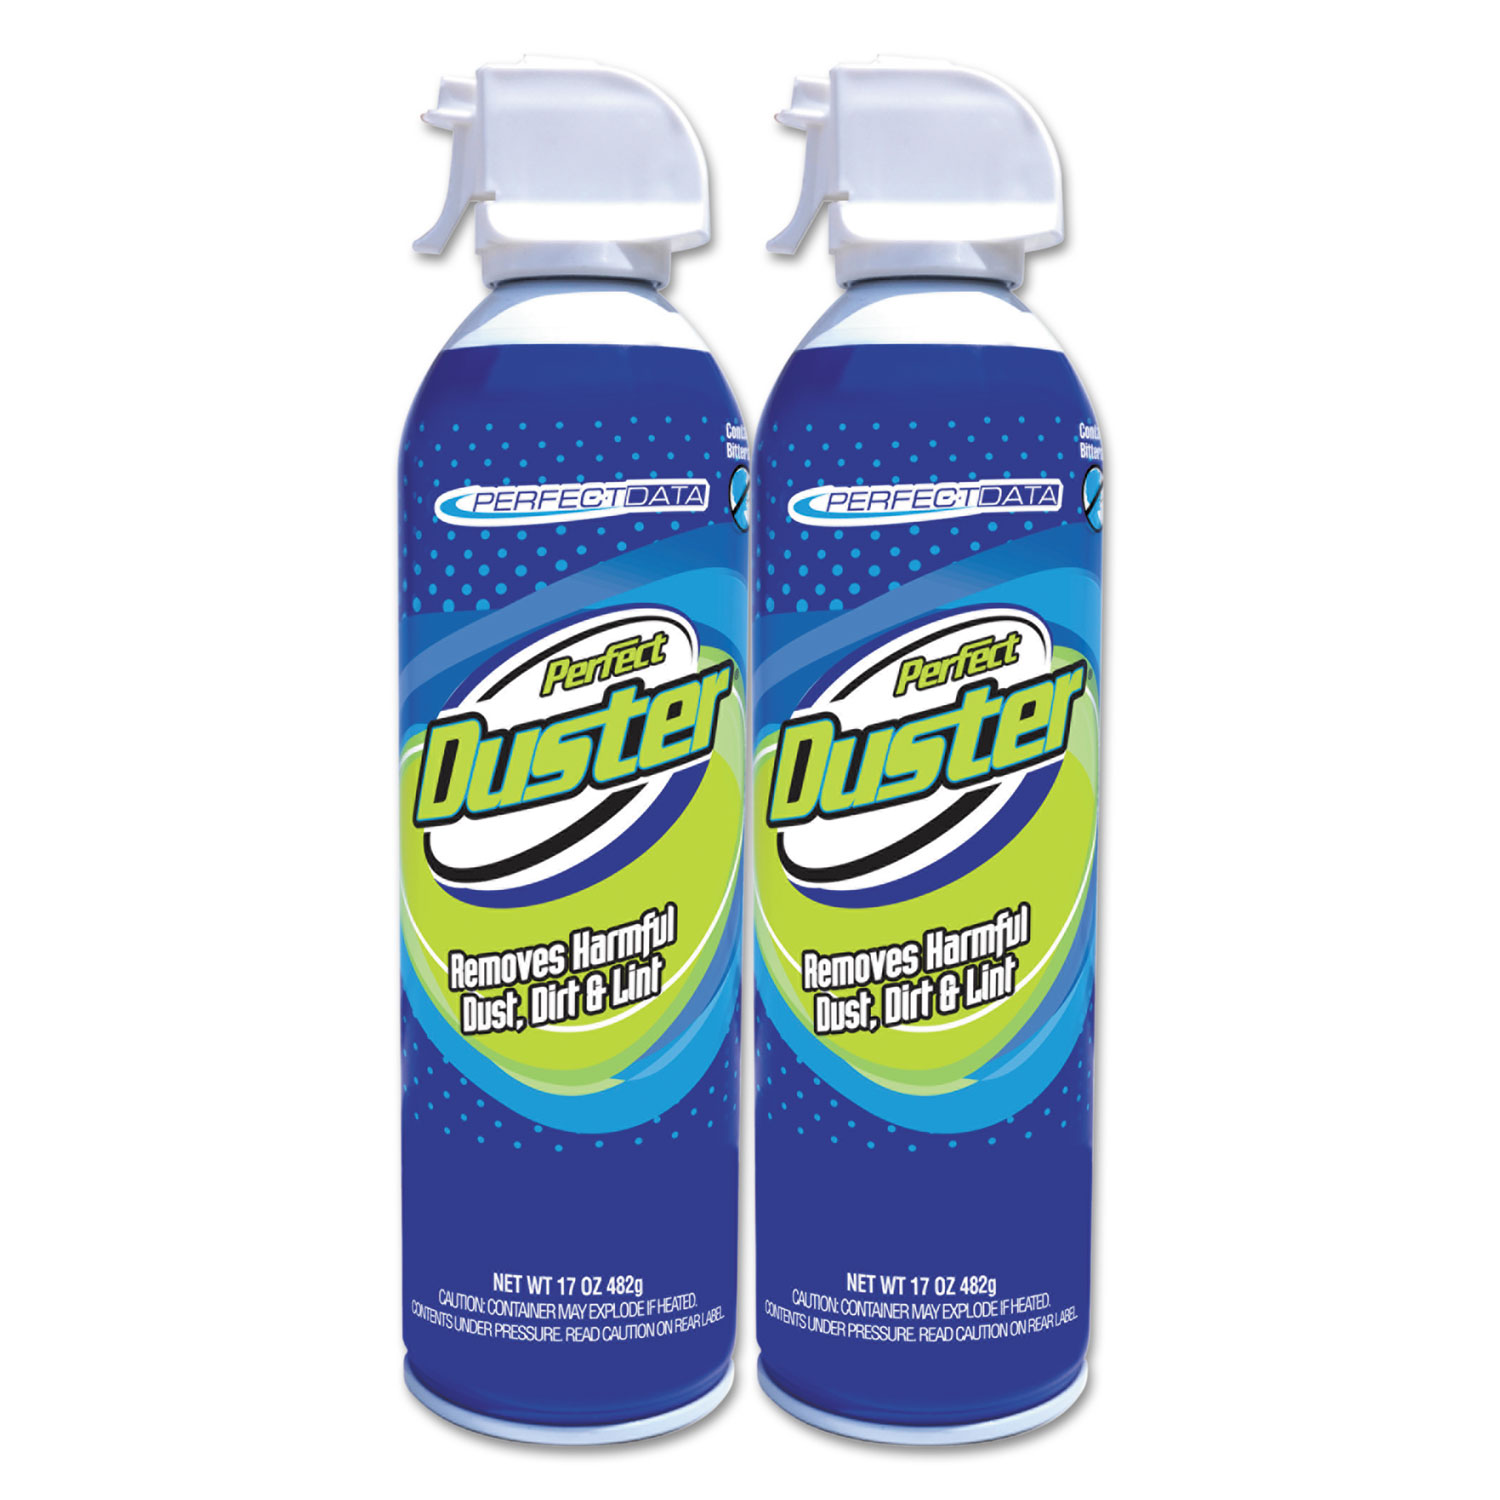  Perfect Duster 50501212 Power Duster, 17 oz Can, 2/Pk (PDC50501212) 